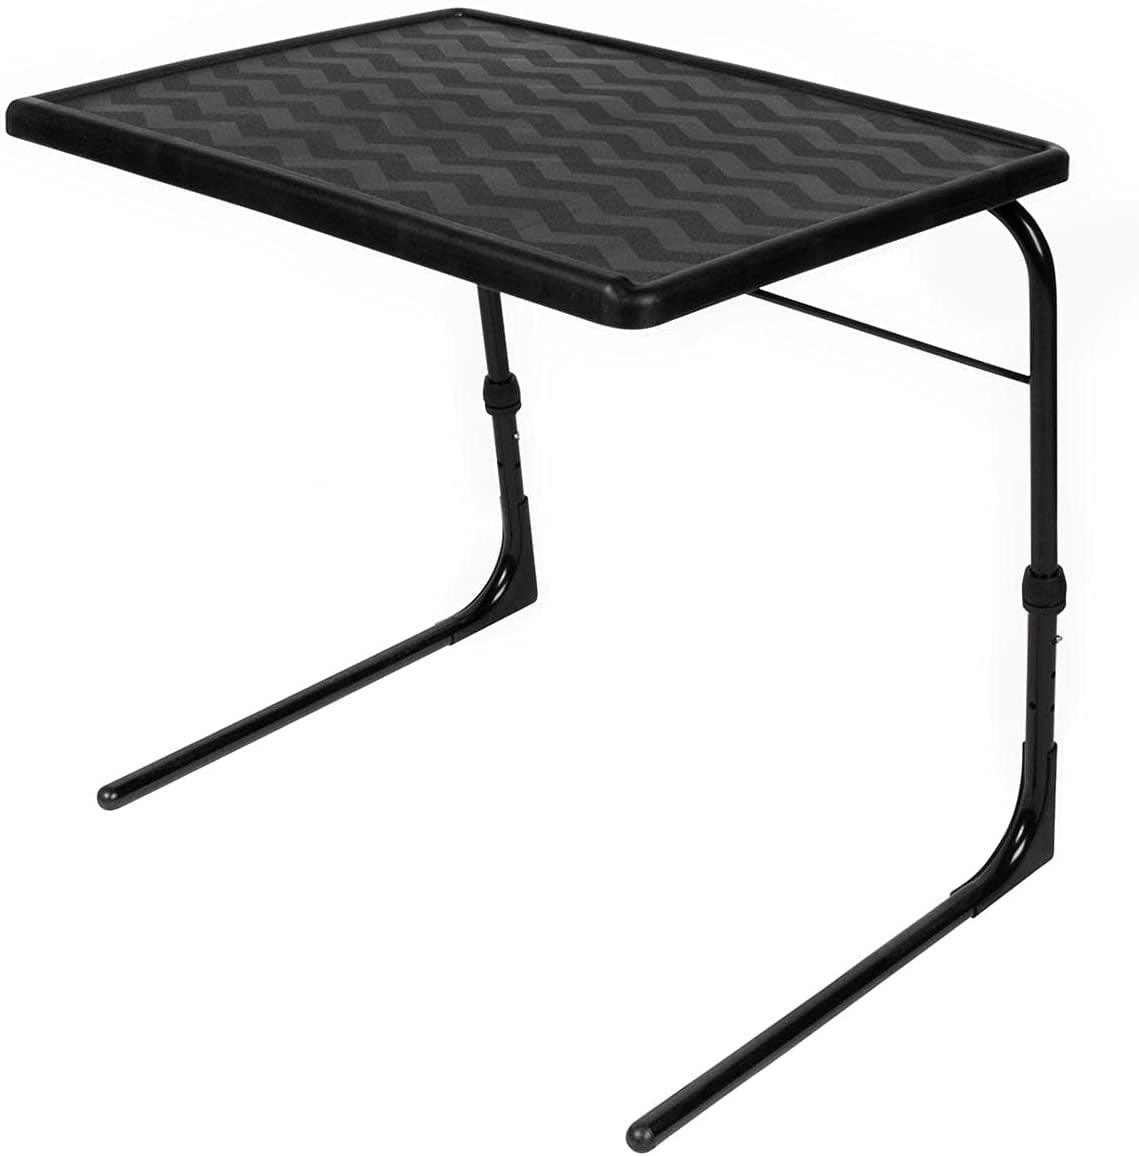 Table Mate V TV Tray Table Black Couch Table Trays for Eating Snack Food Adjustable TV Table with 3 Angles Extra Wide Folding TV Dinner Table Stowaway Laptop Stand Portable Bed Dinner Tray 